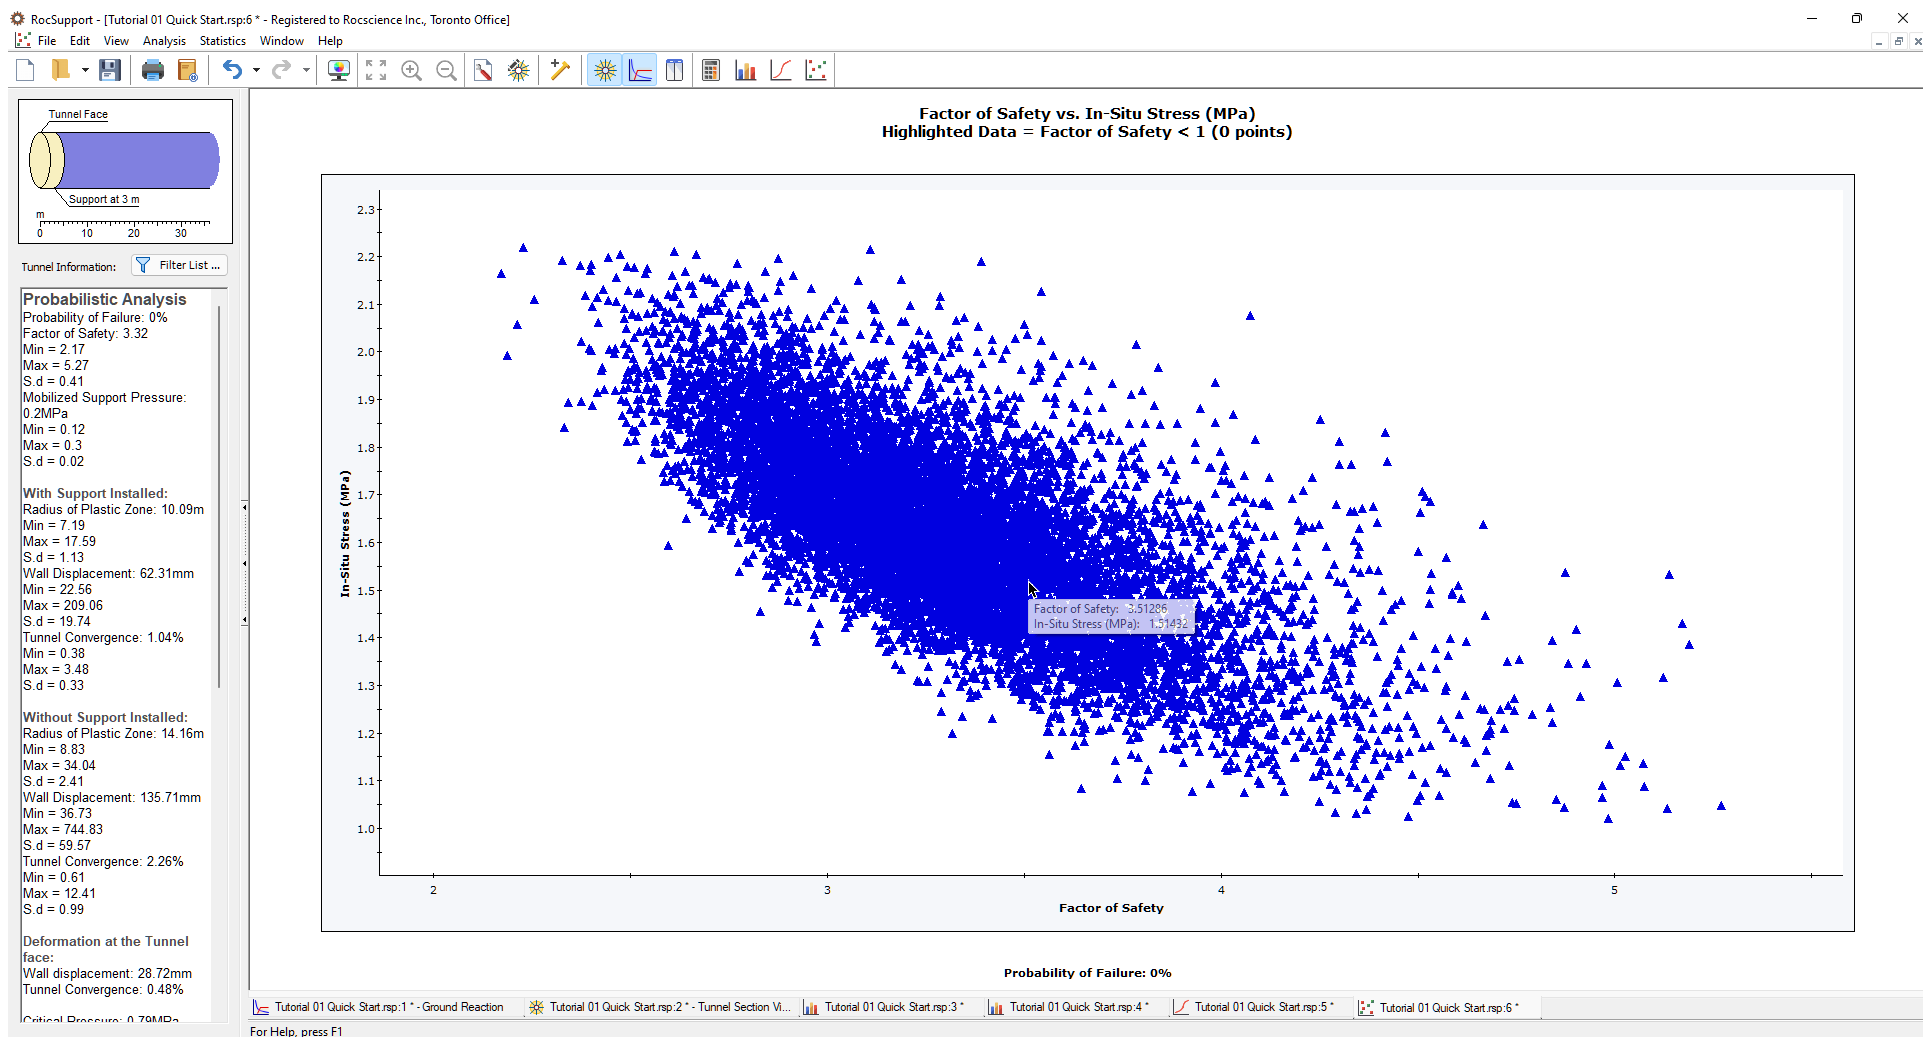 Scatter plot view